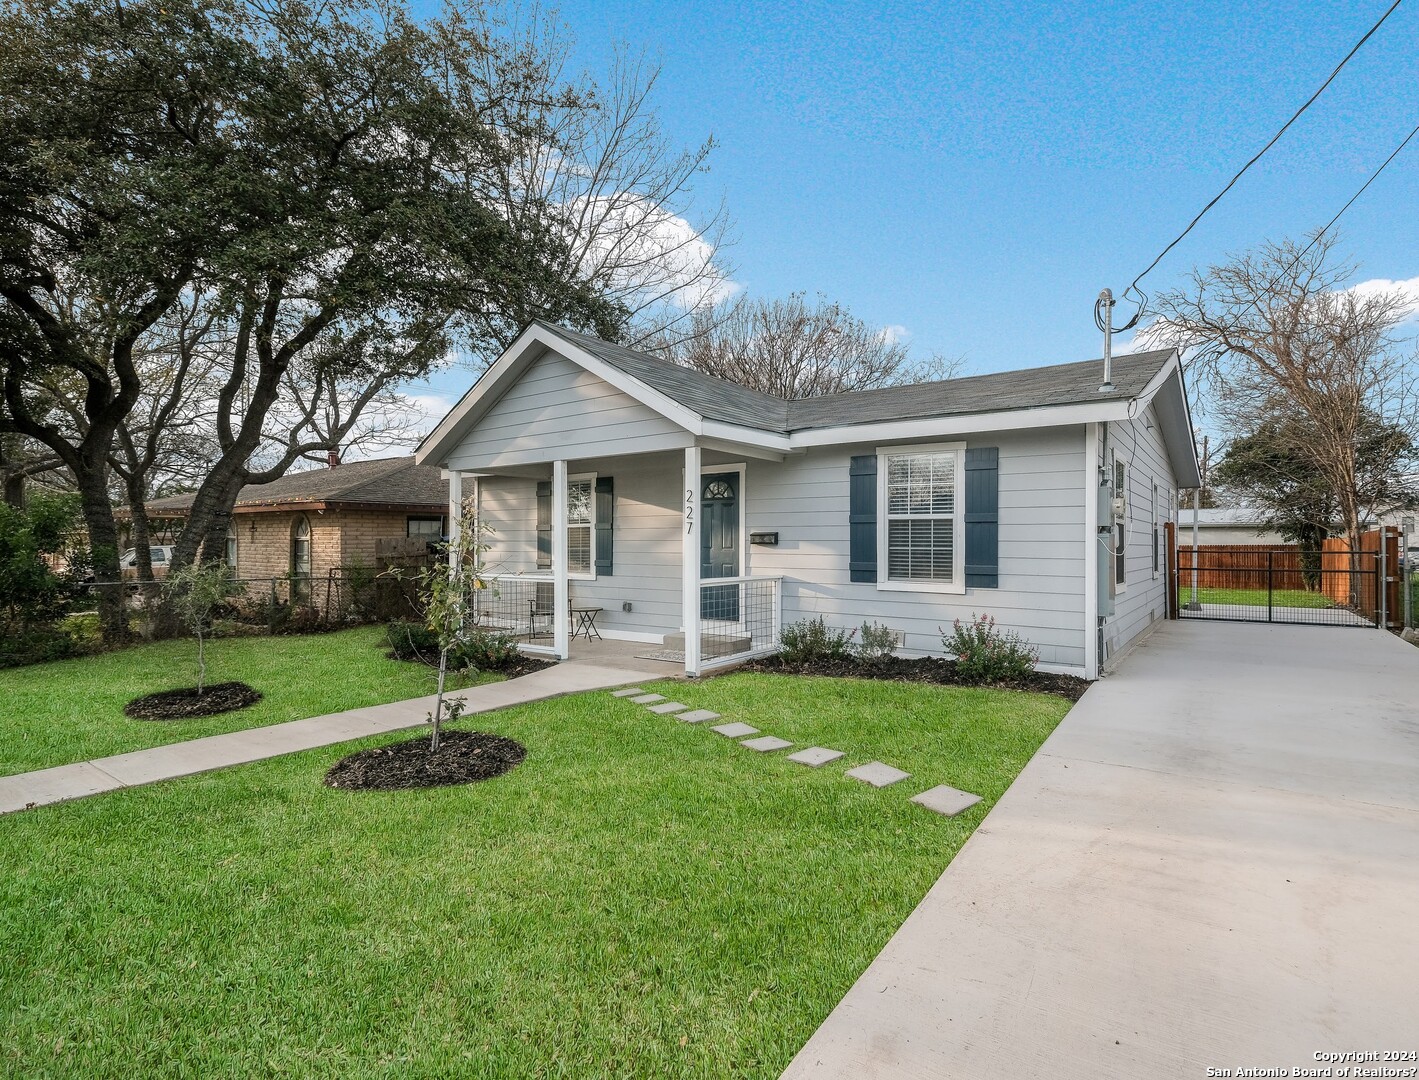 Photo of 227 Odell St in San Antonio, TX